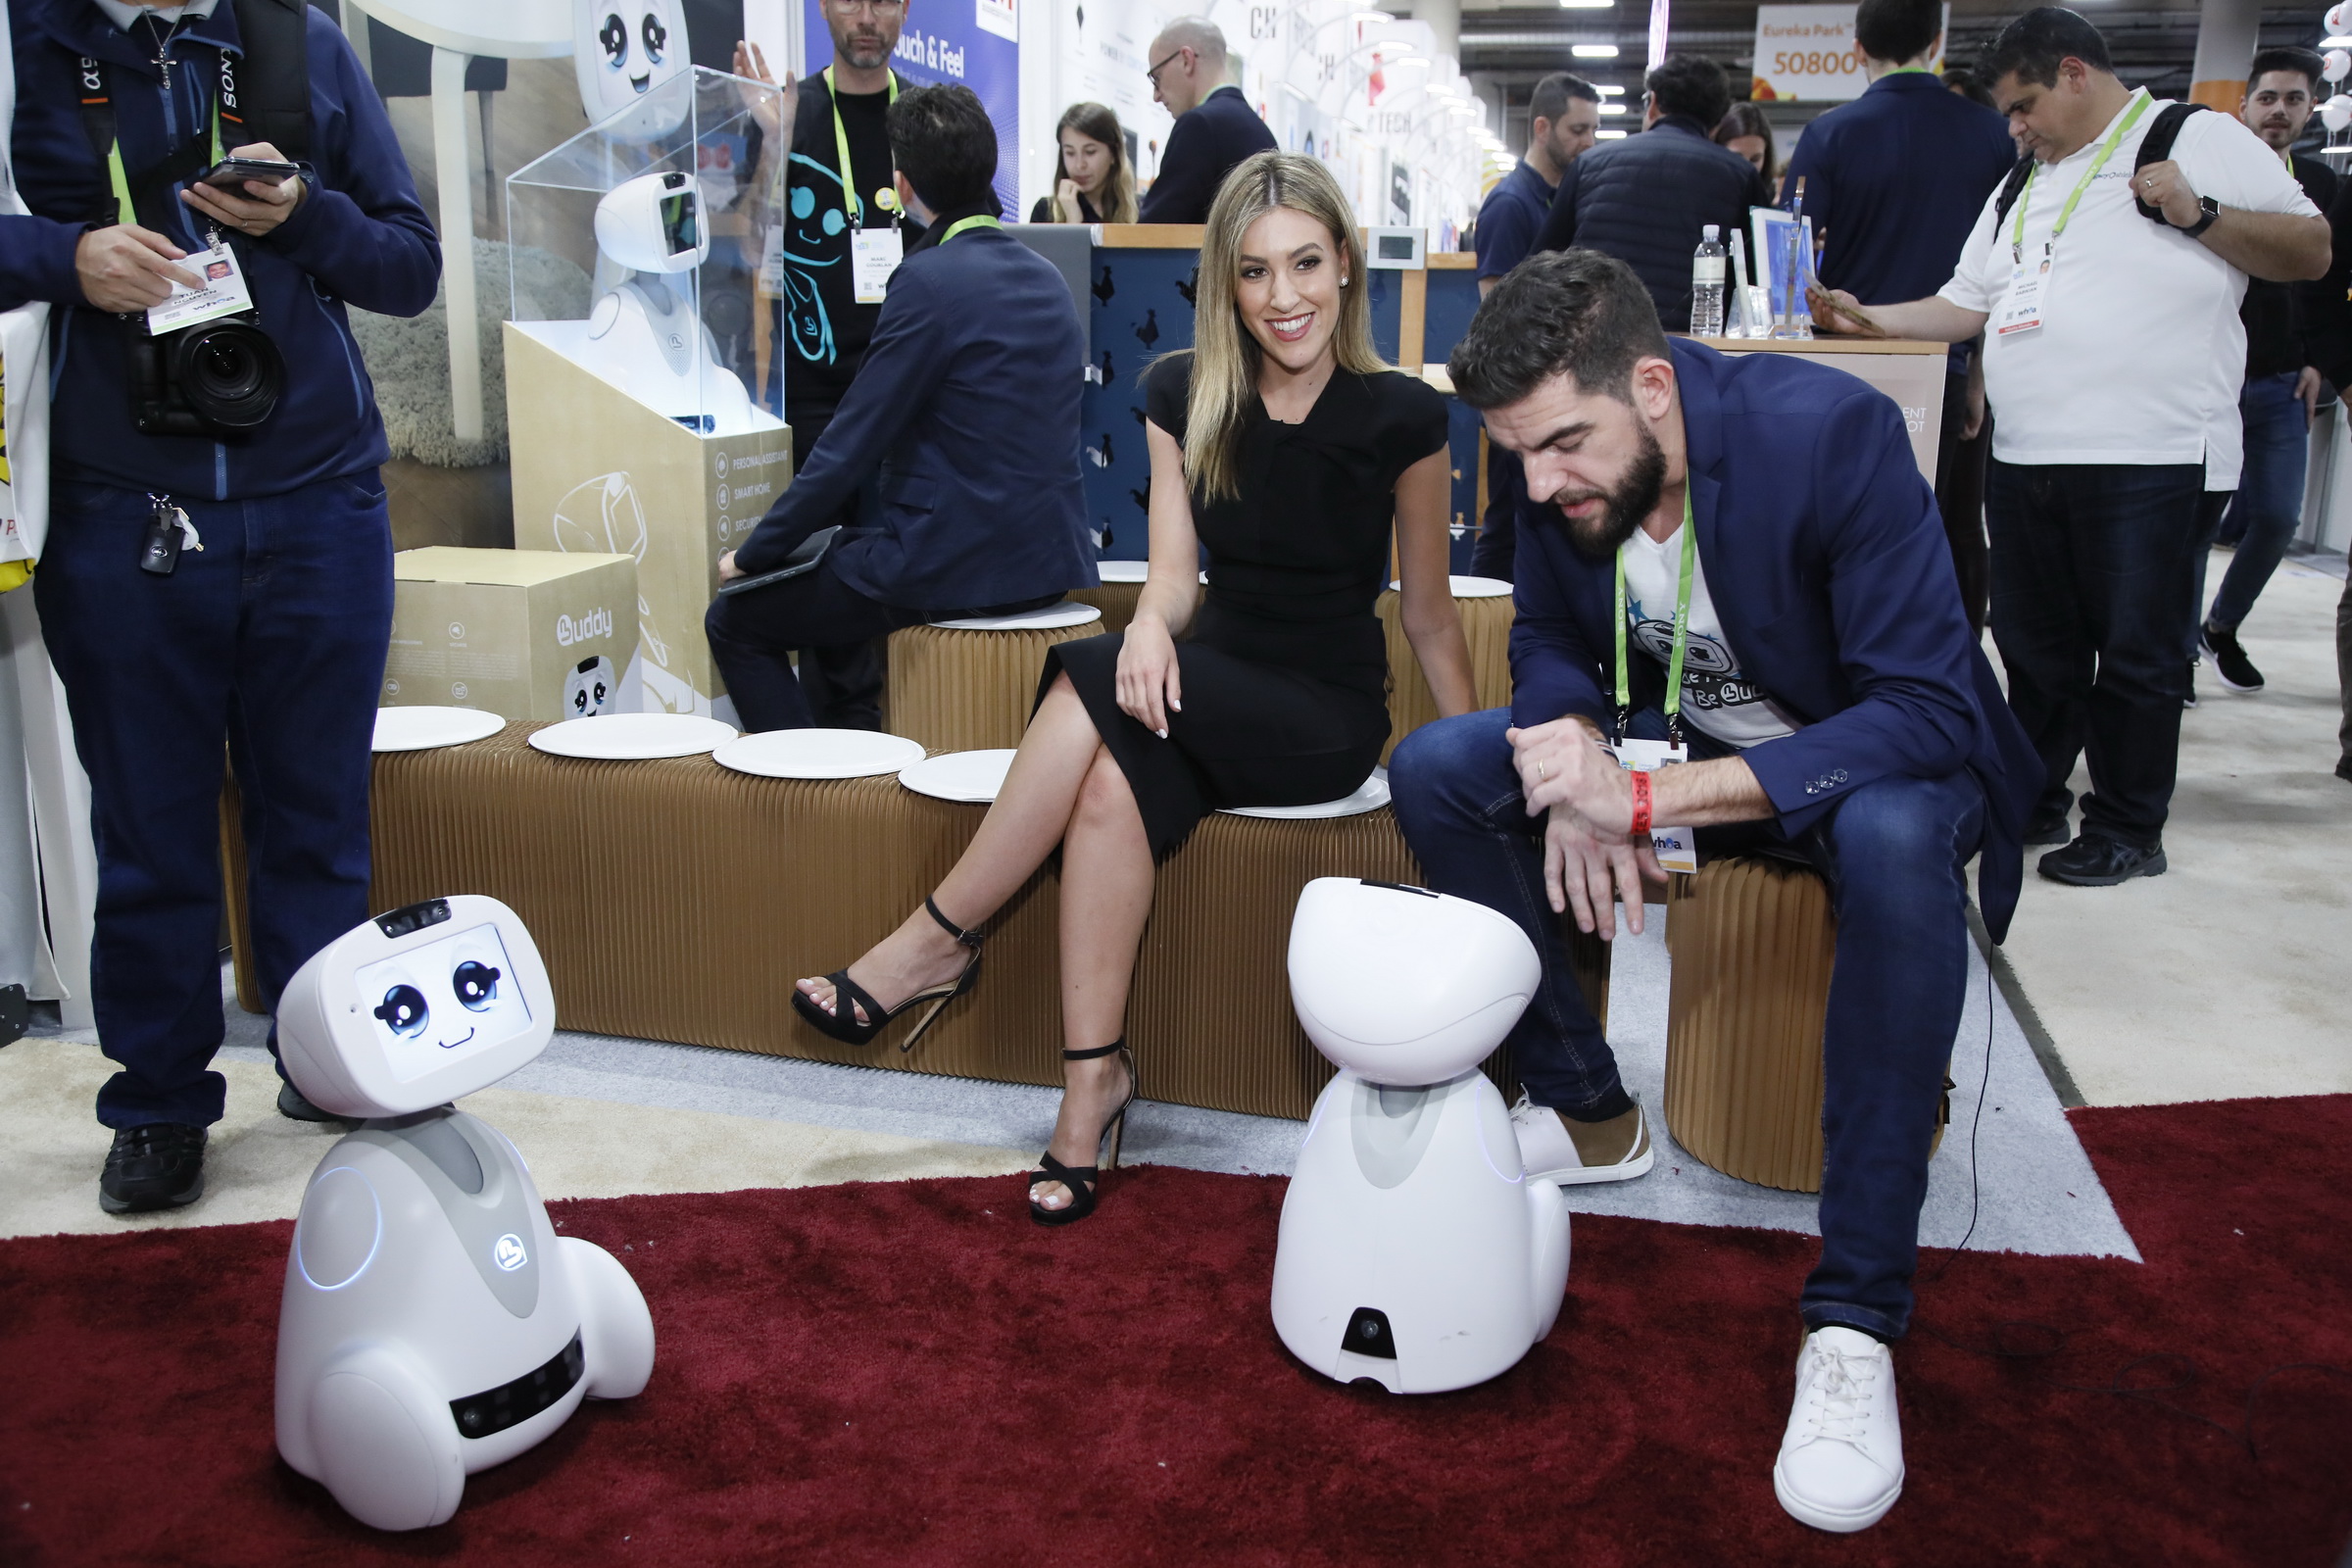 A product demo featuring two robots at an LG area during CES 2018. Photo provided.